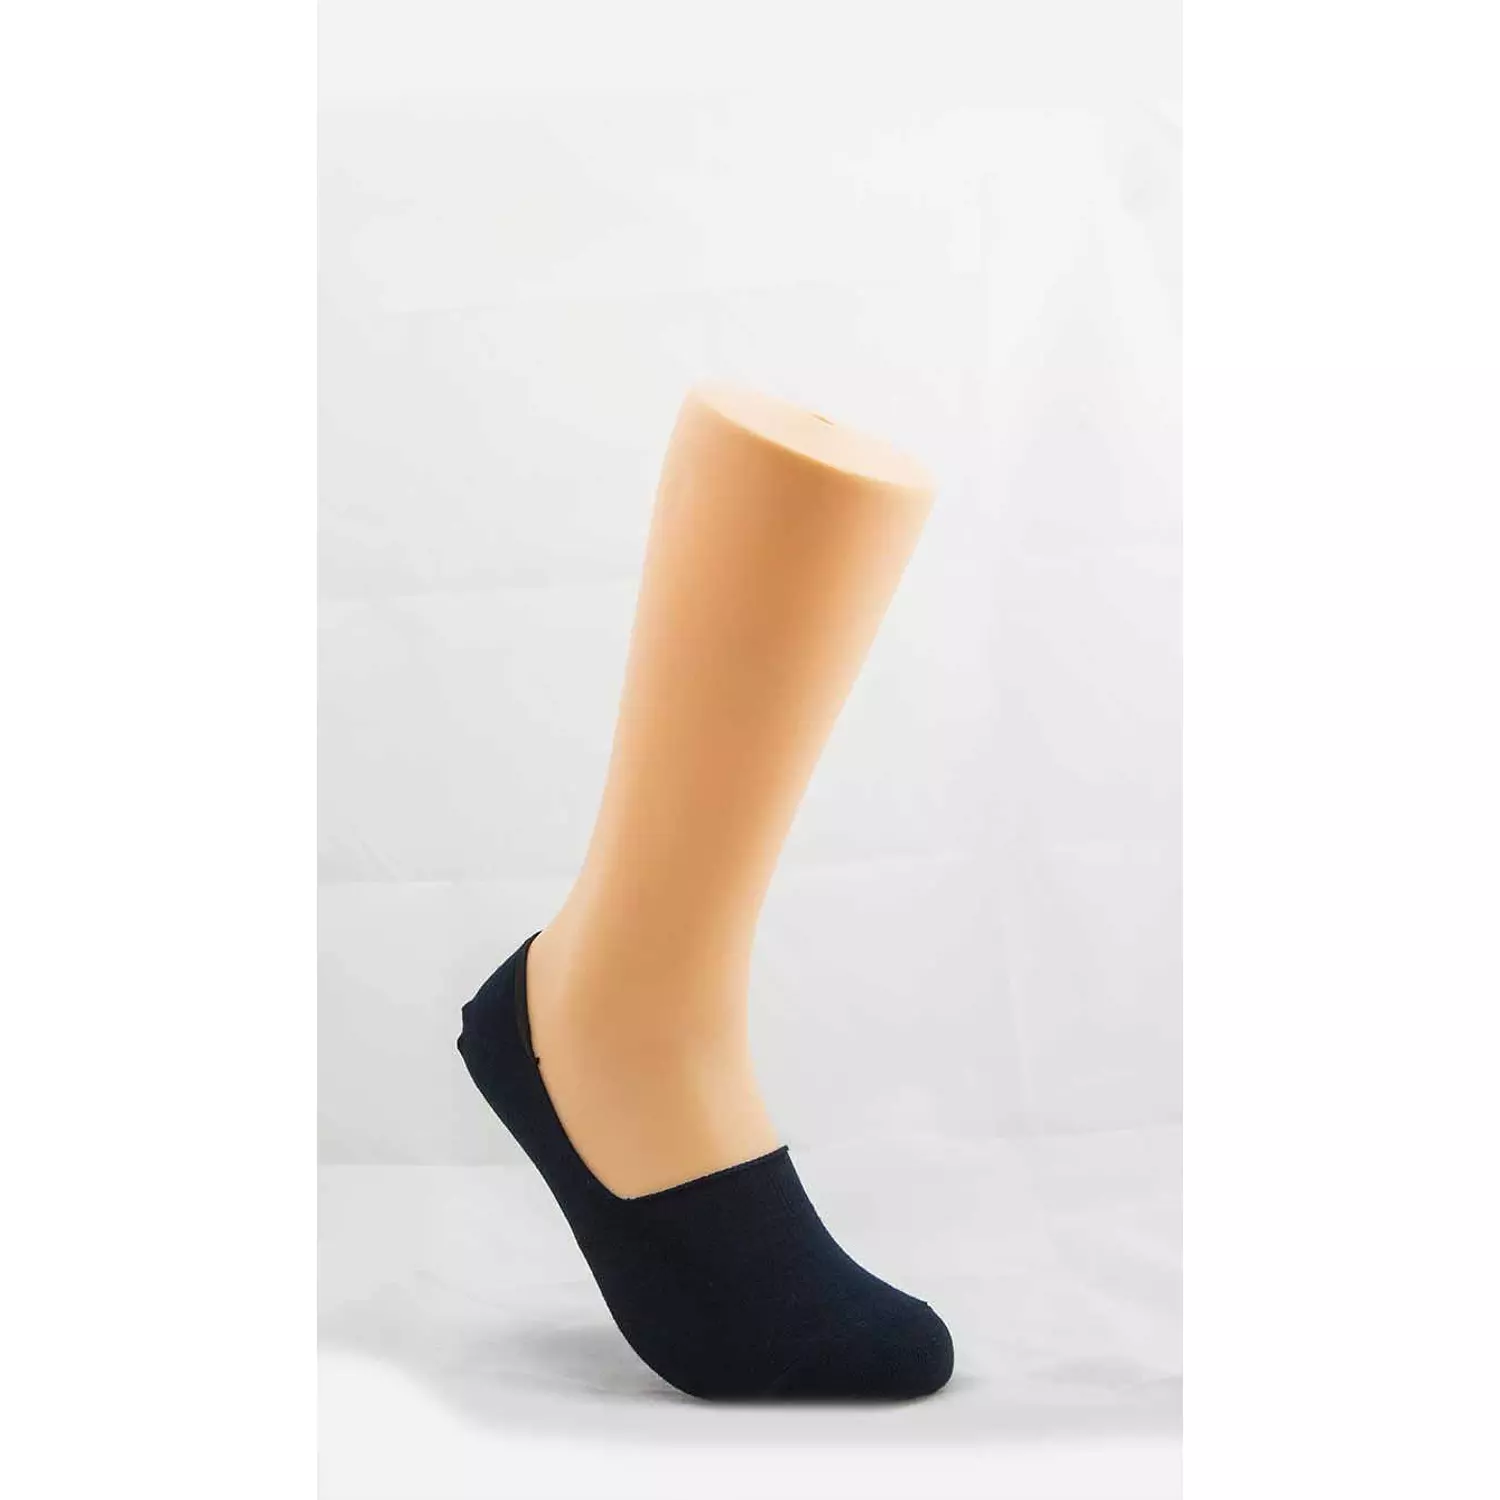  Viva invisible casual Sock for men's hover image